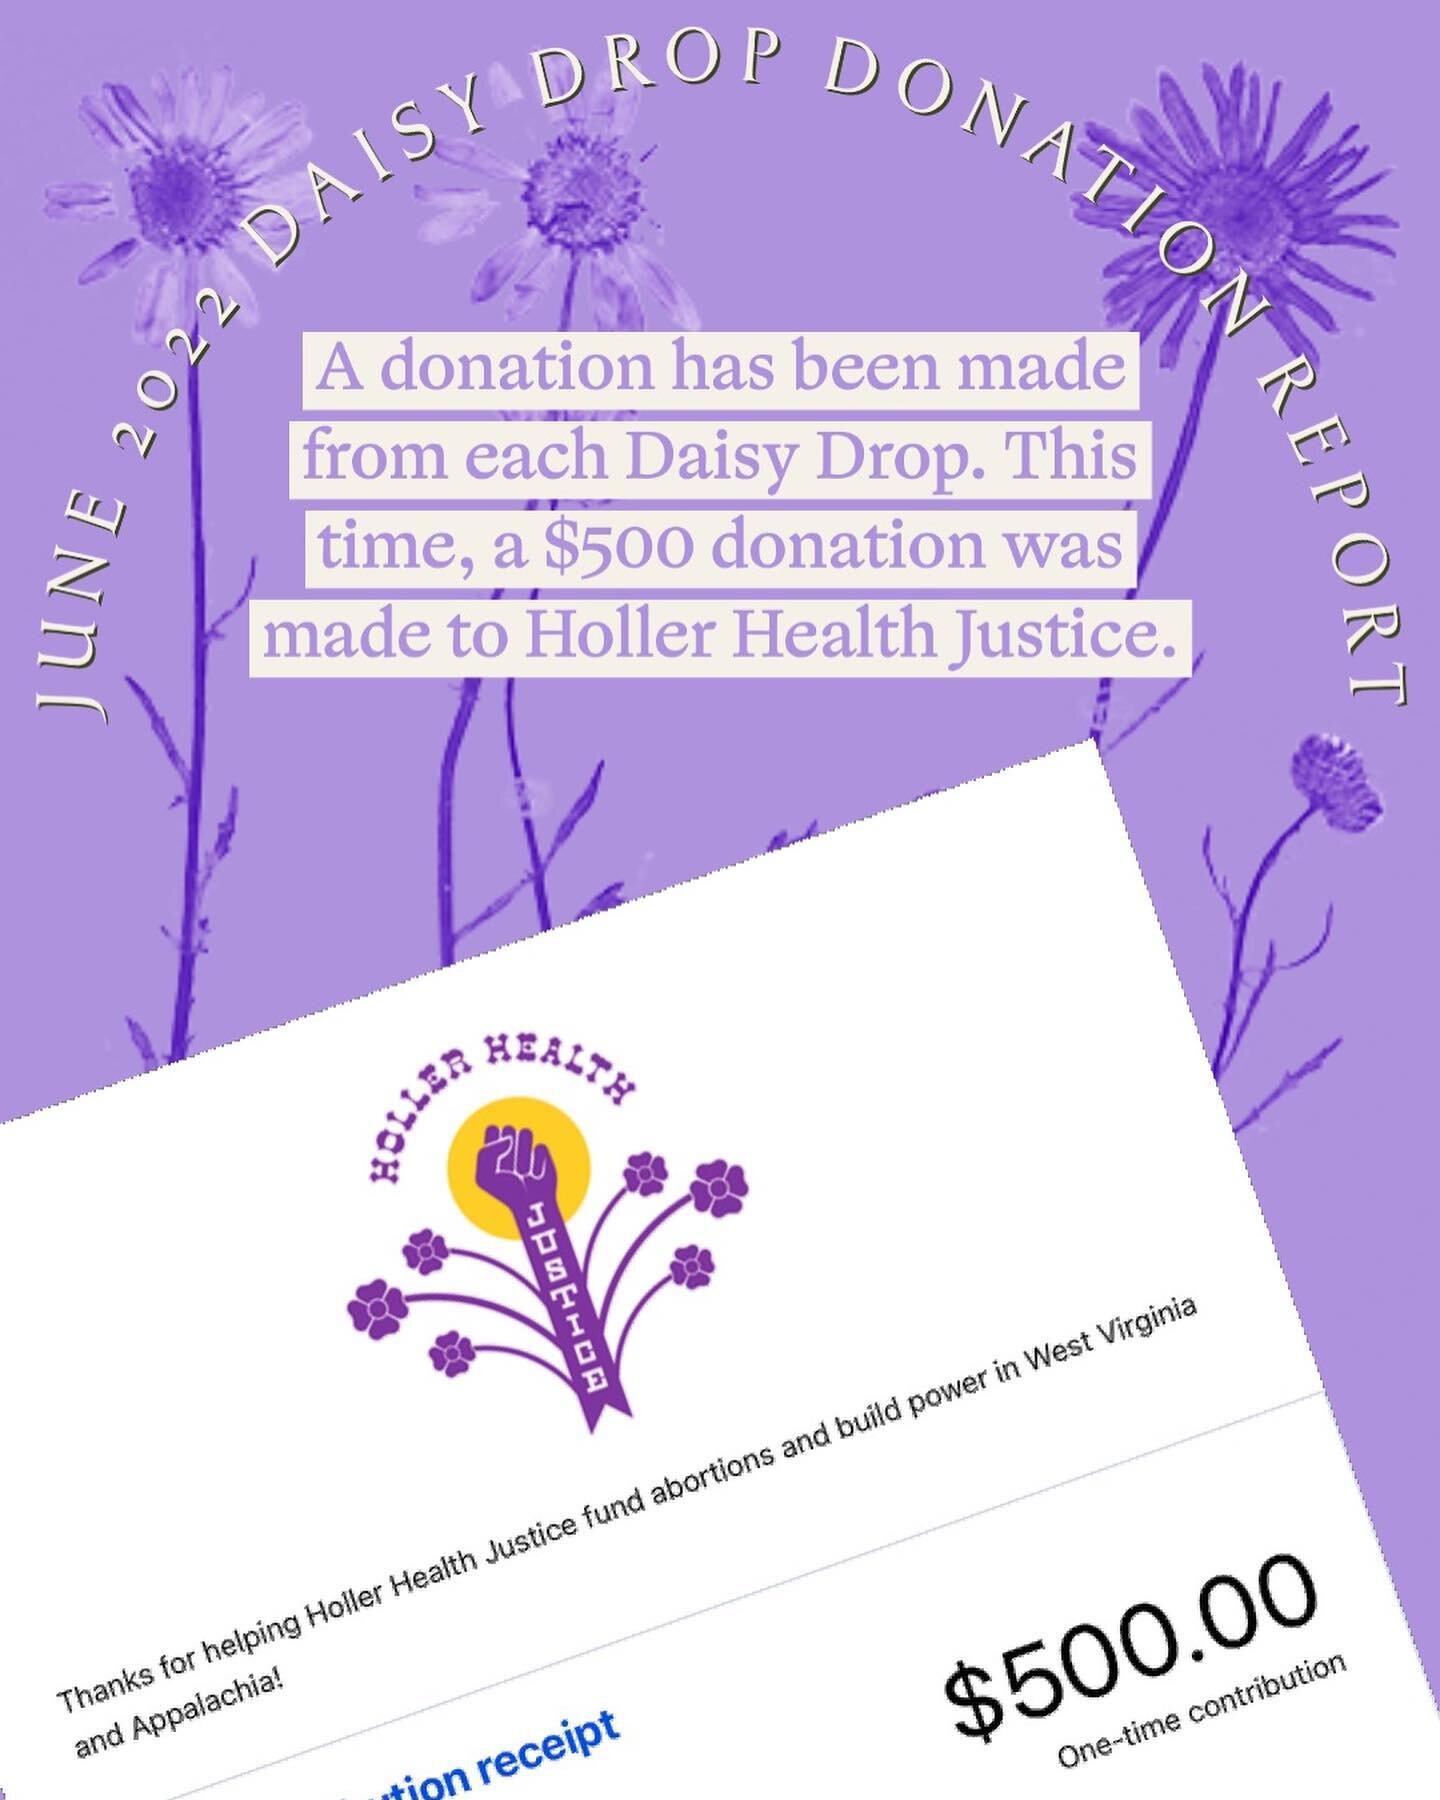 Thank you to everyone for another amazing Daisy Drop&mdash;we sold out in 15 minutes. Every time I do a Daisy Drop, a donation is made to a community organization. This time, we donated $500 to @hollerhealthjustice . Thank you for supporting my work,